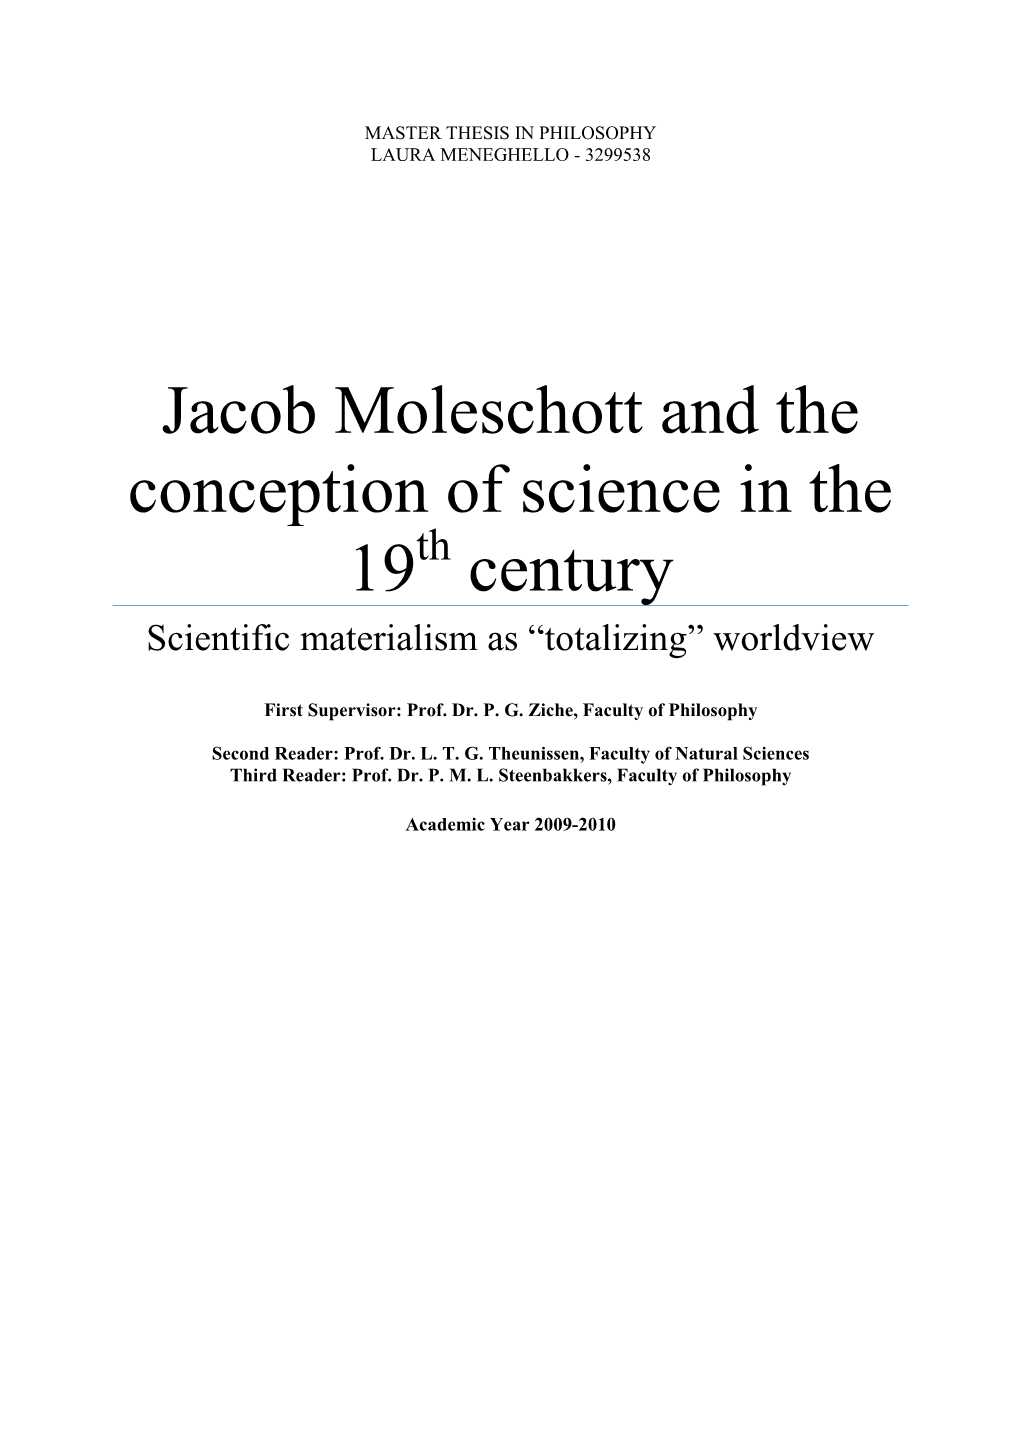 Jacob Moleschott and the Conception of Science in the 19 Century